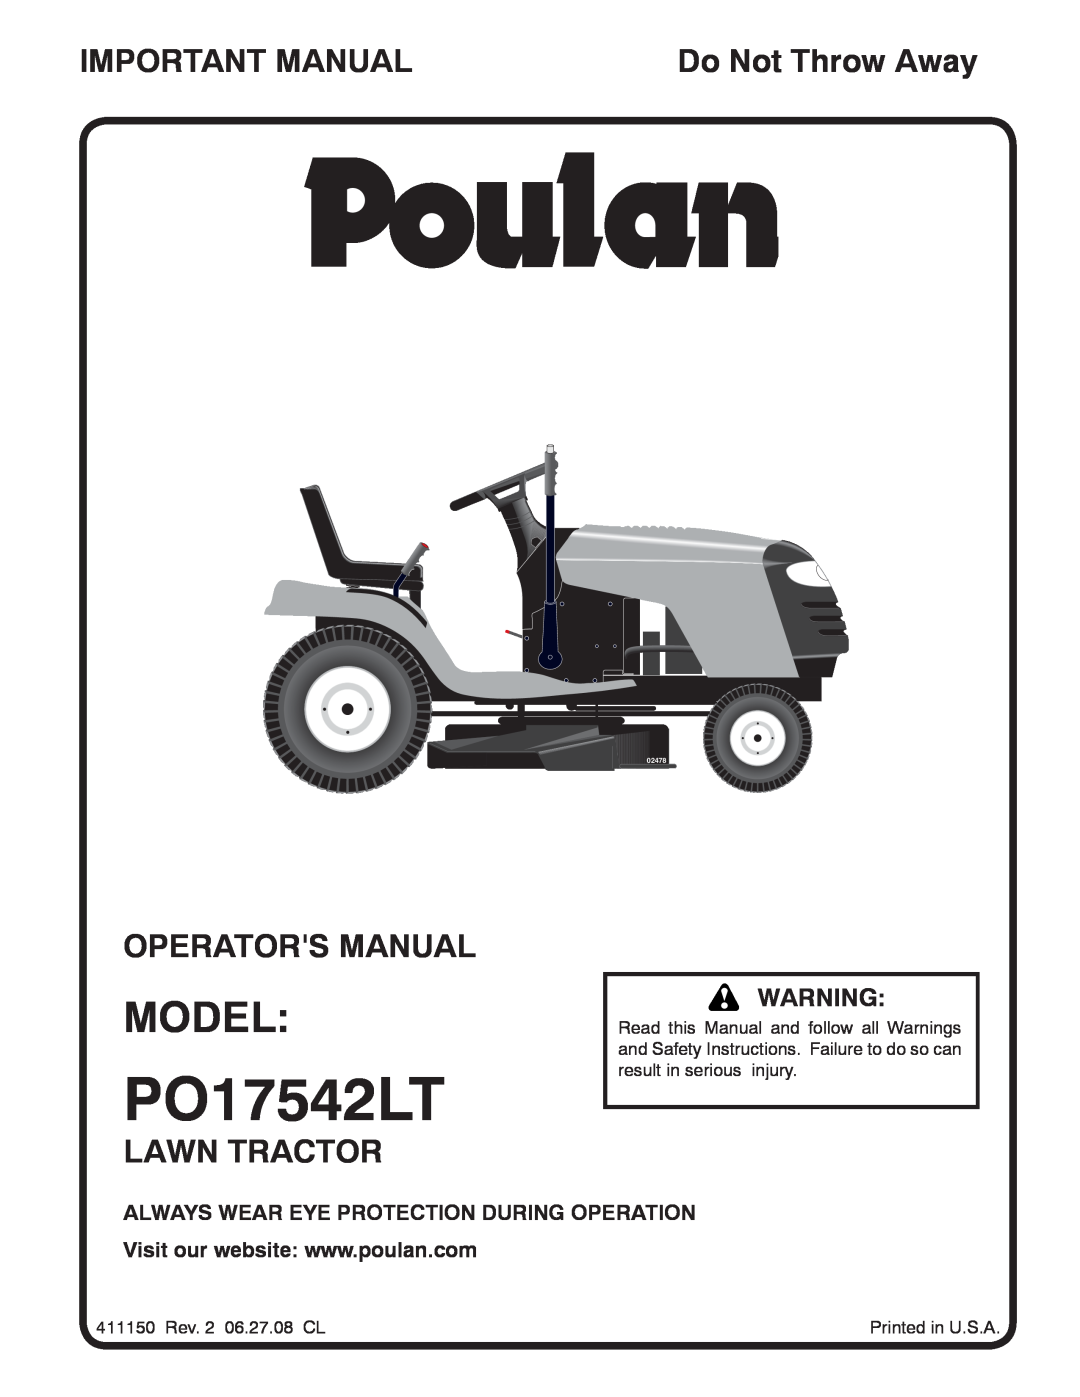 Poulan 96012006904 manual Model, Important Manual, Operators Manual, Lawn Tractor, Do Not Throw Away, PO17542LT, 02478 